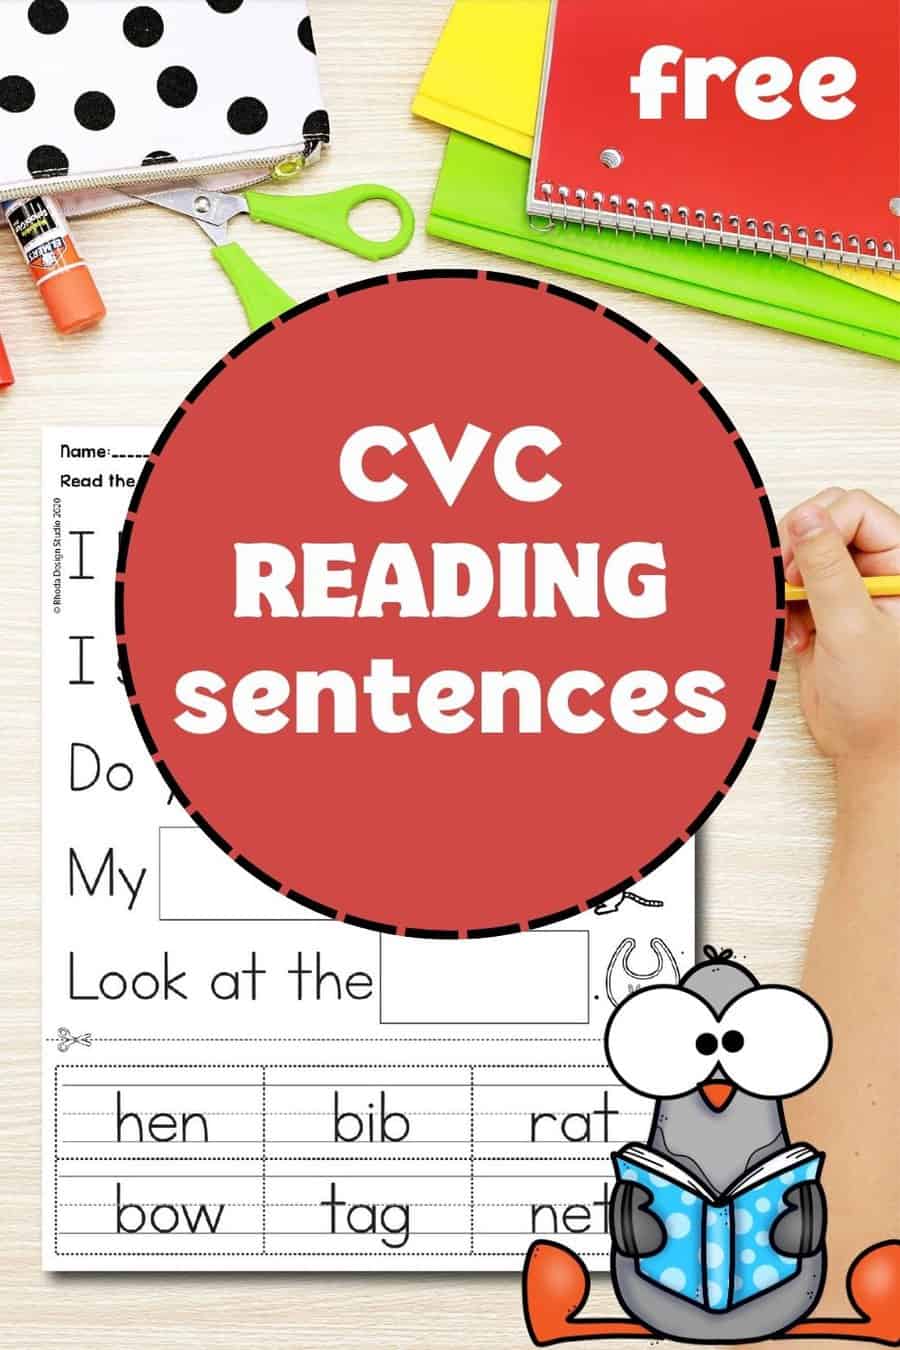 I Can Read CVC Sentences. Free worksheets for Pre-K and Kindergarten reading practice.